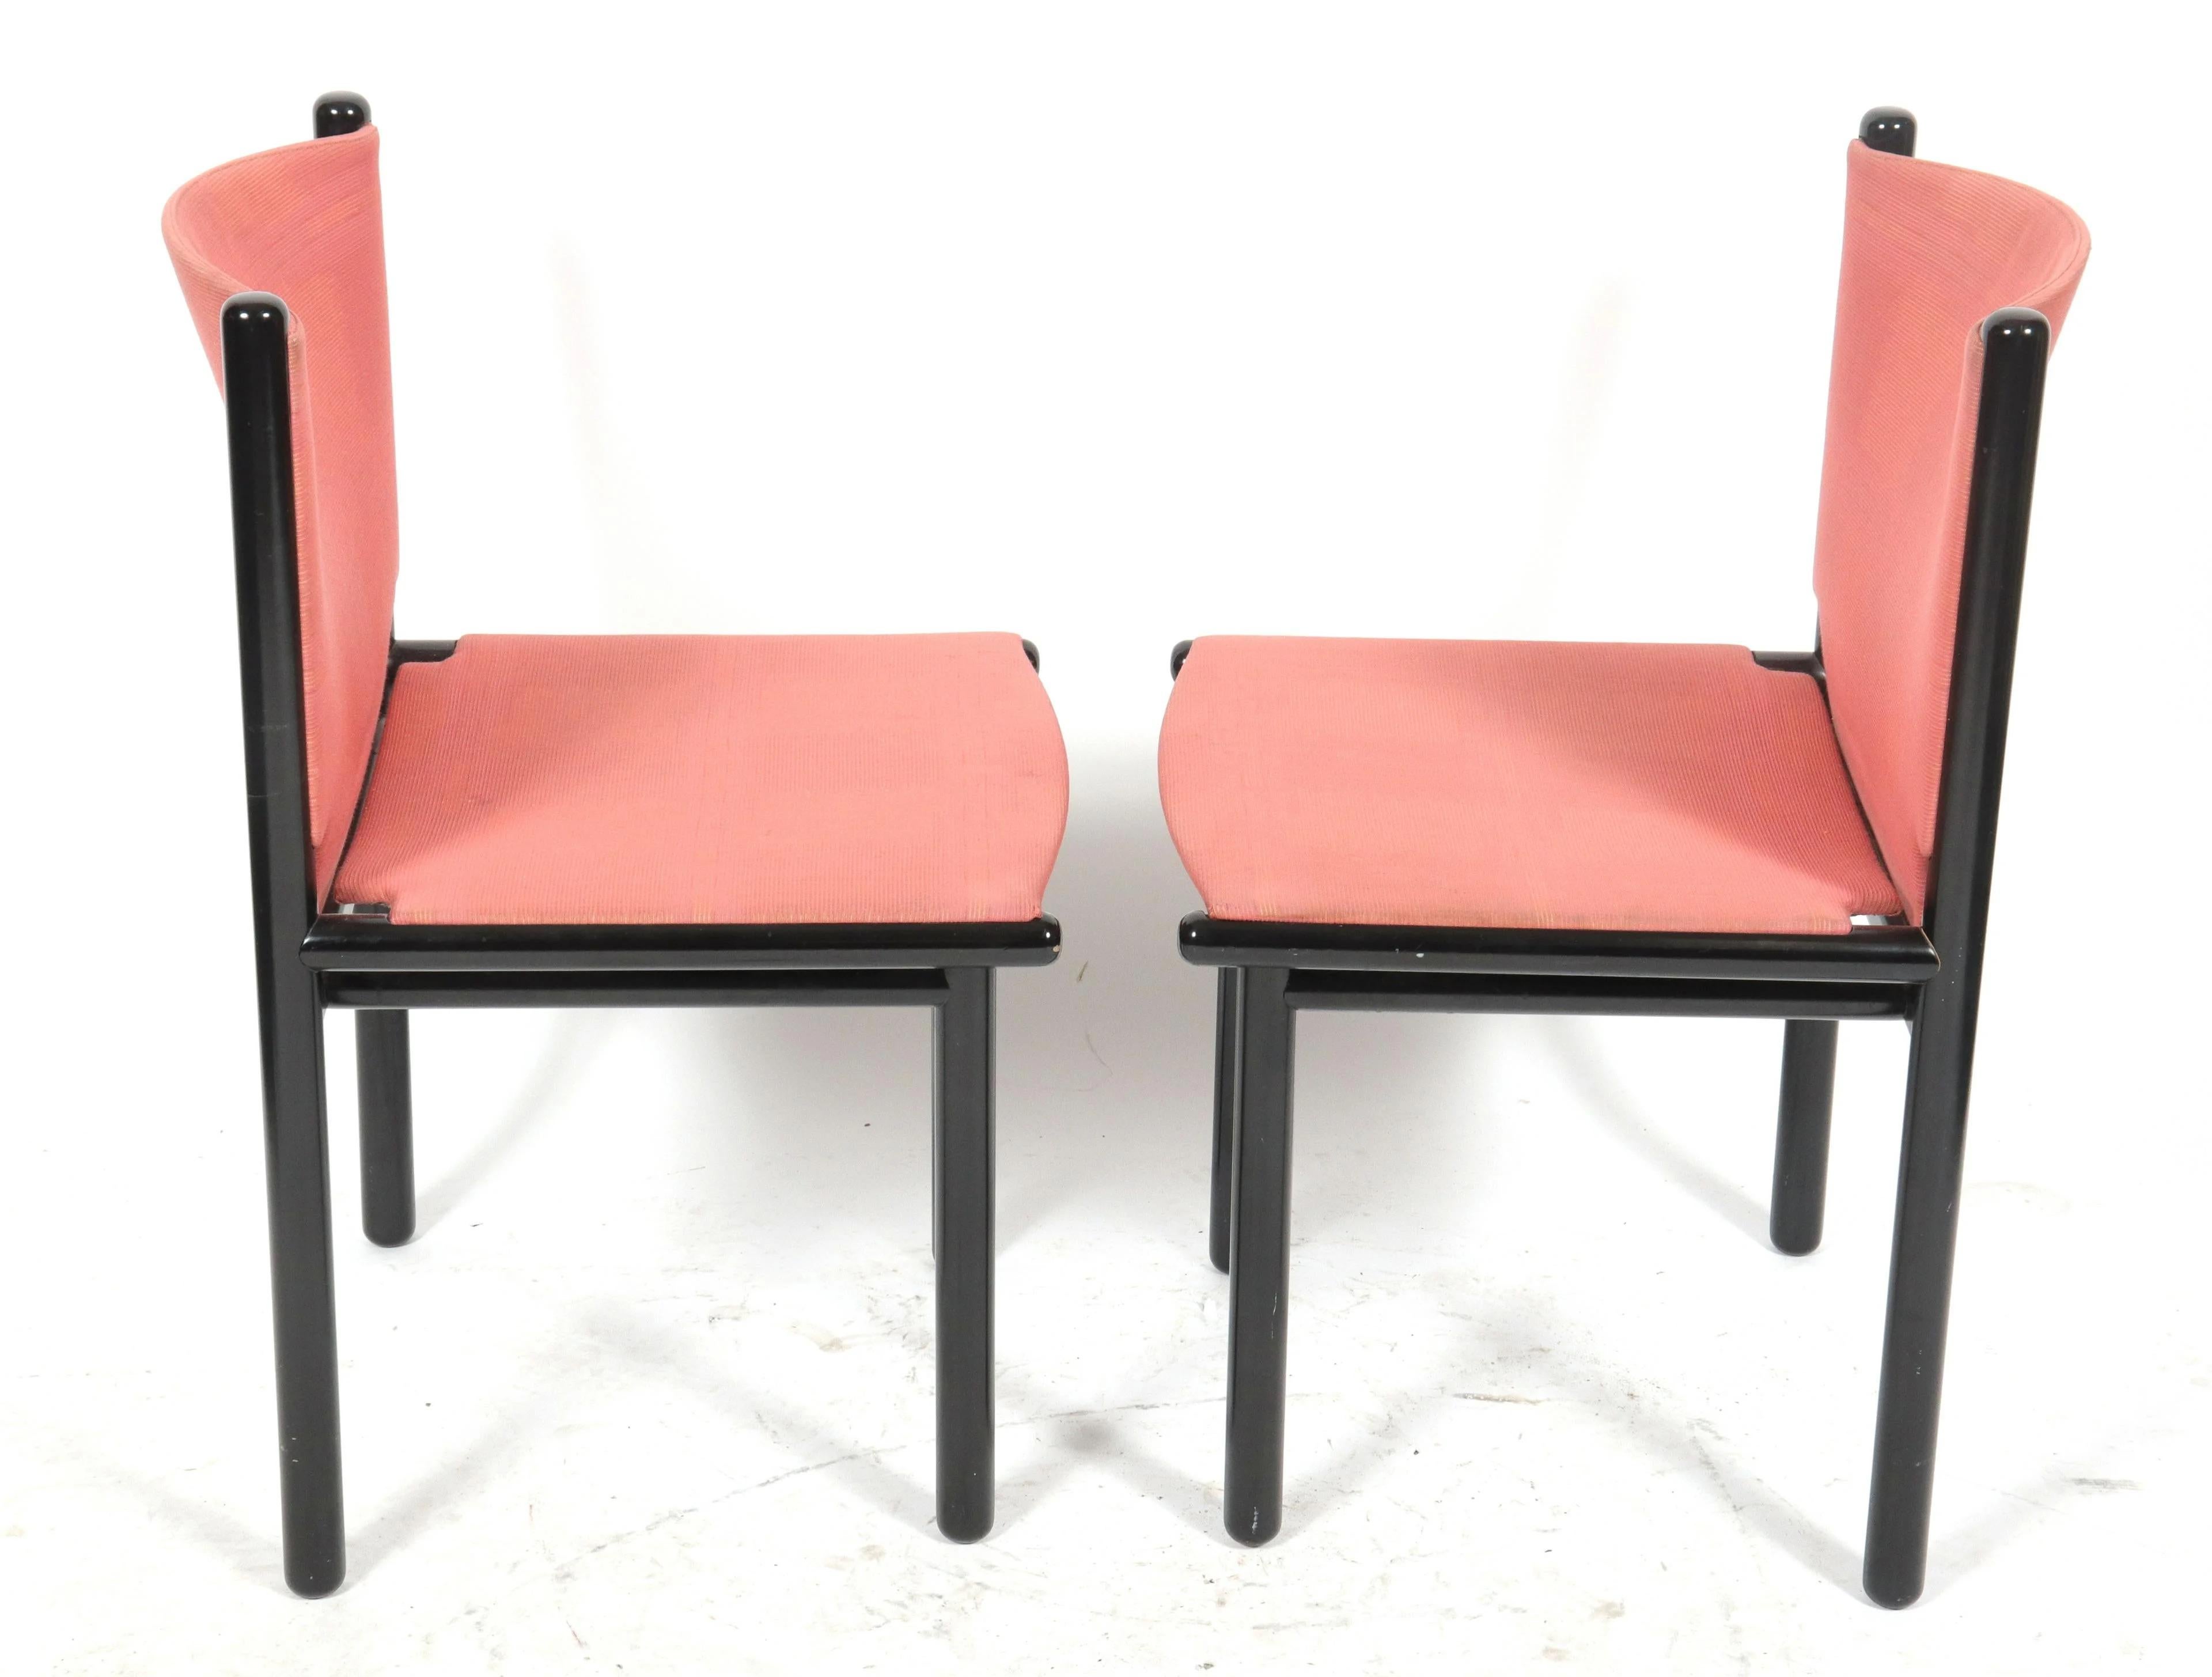 Gianfranco Frattini for Cassina Dining Chair, Black Lacquered Frame, Pink, 1985 In Fair Condition For Sale In Brooklyn, NY